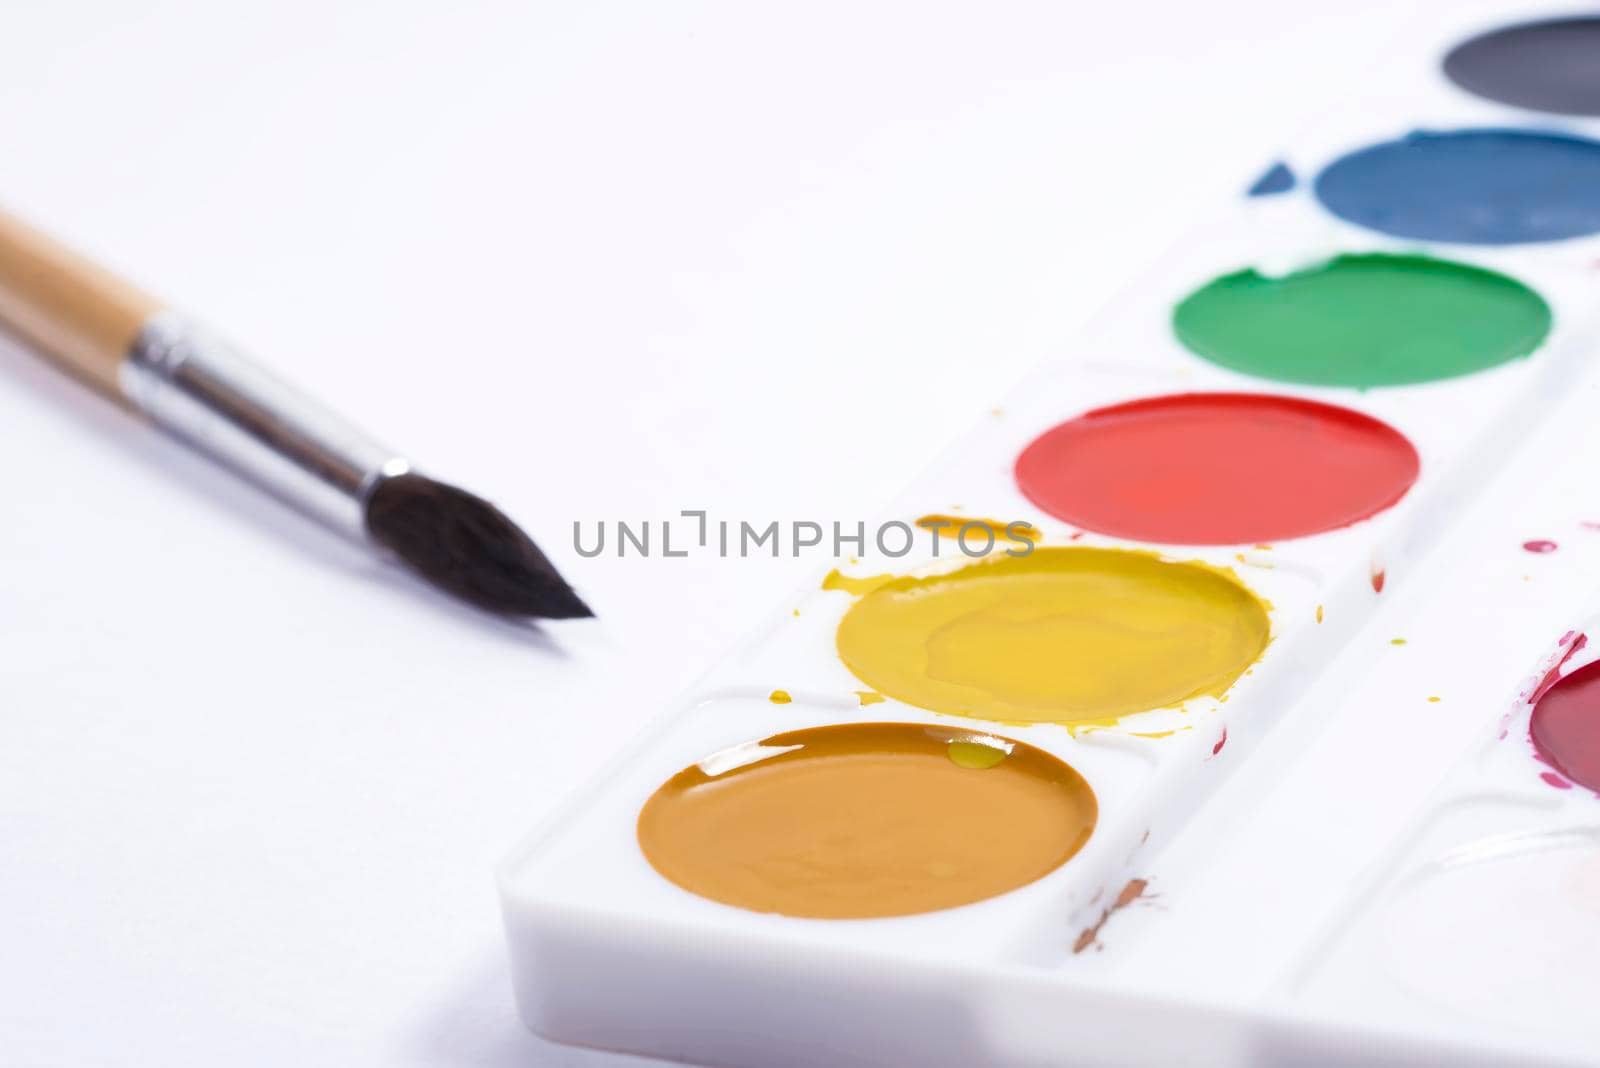 Top view of paintbrushes palette on white paper background by Estival